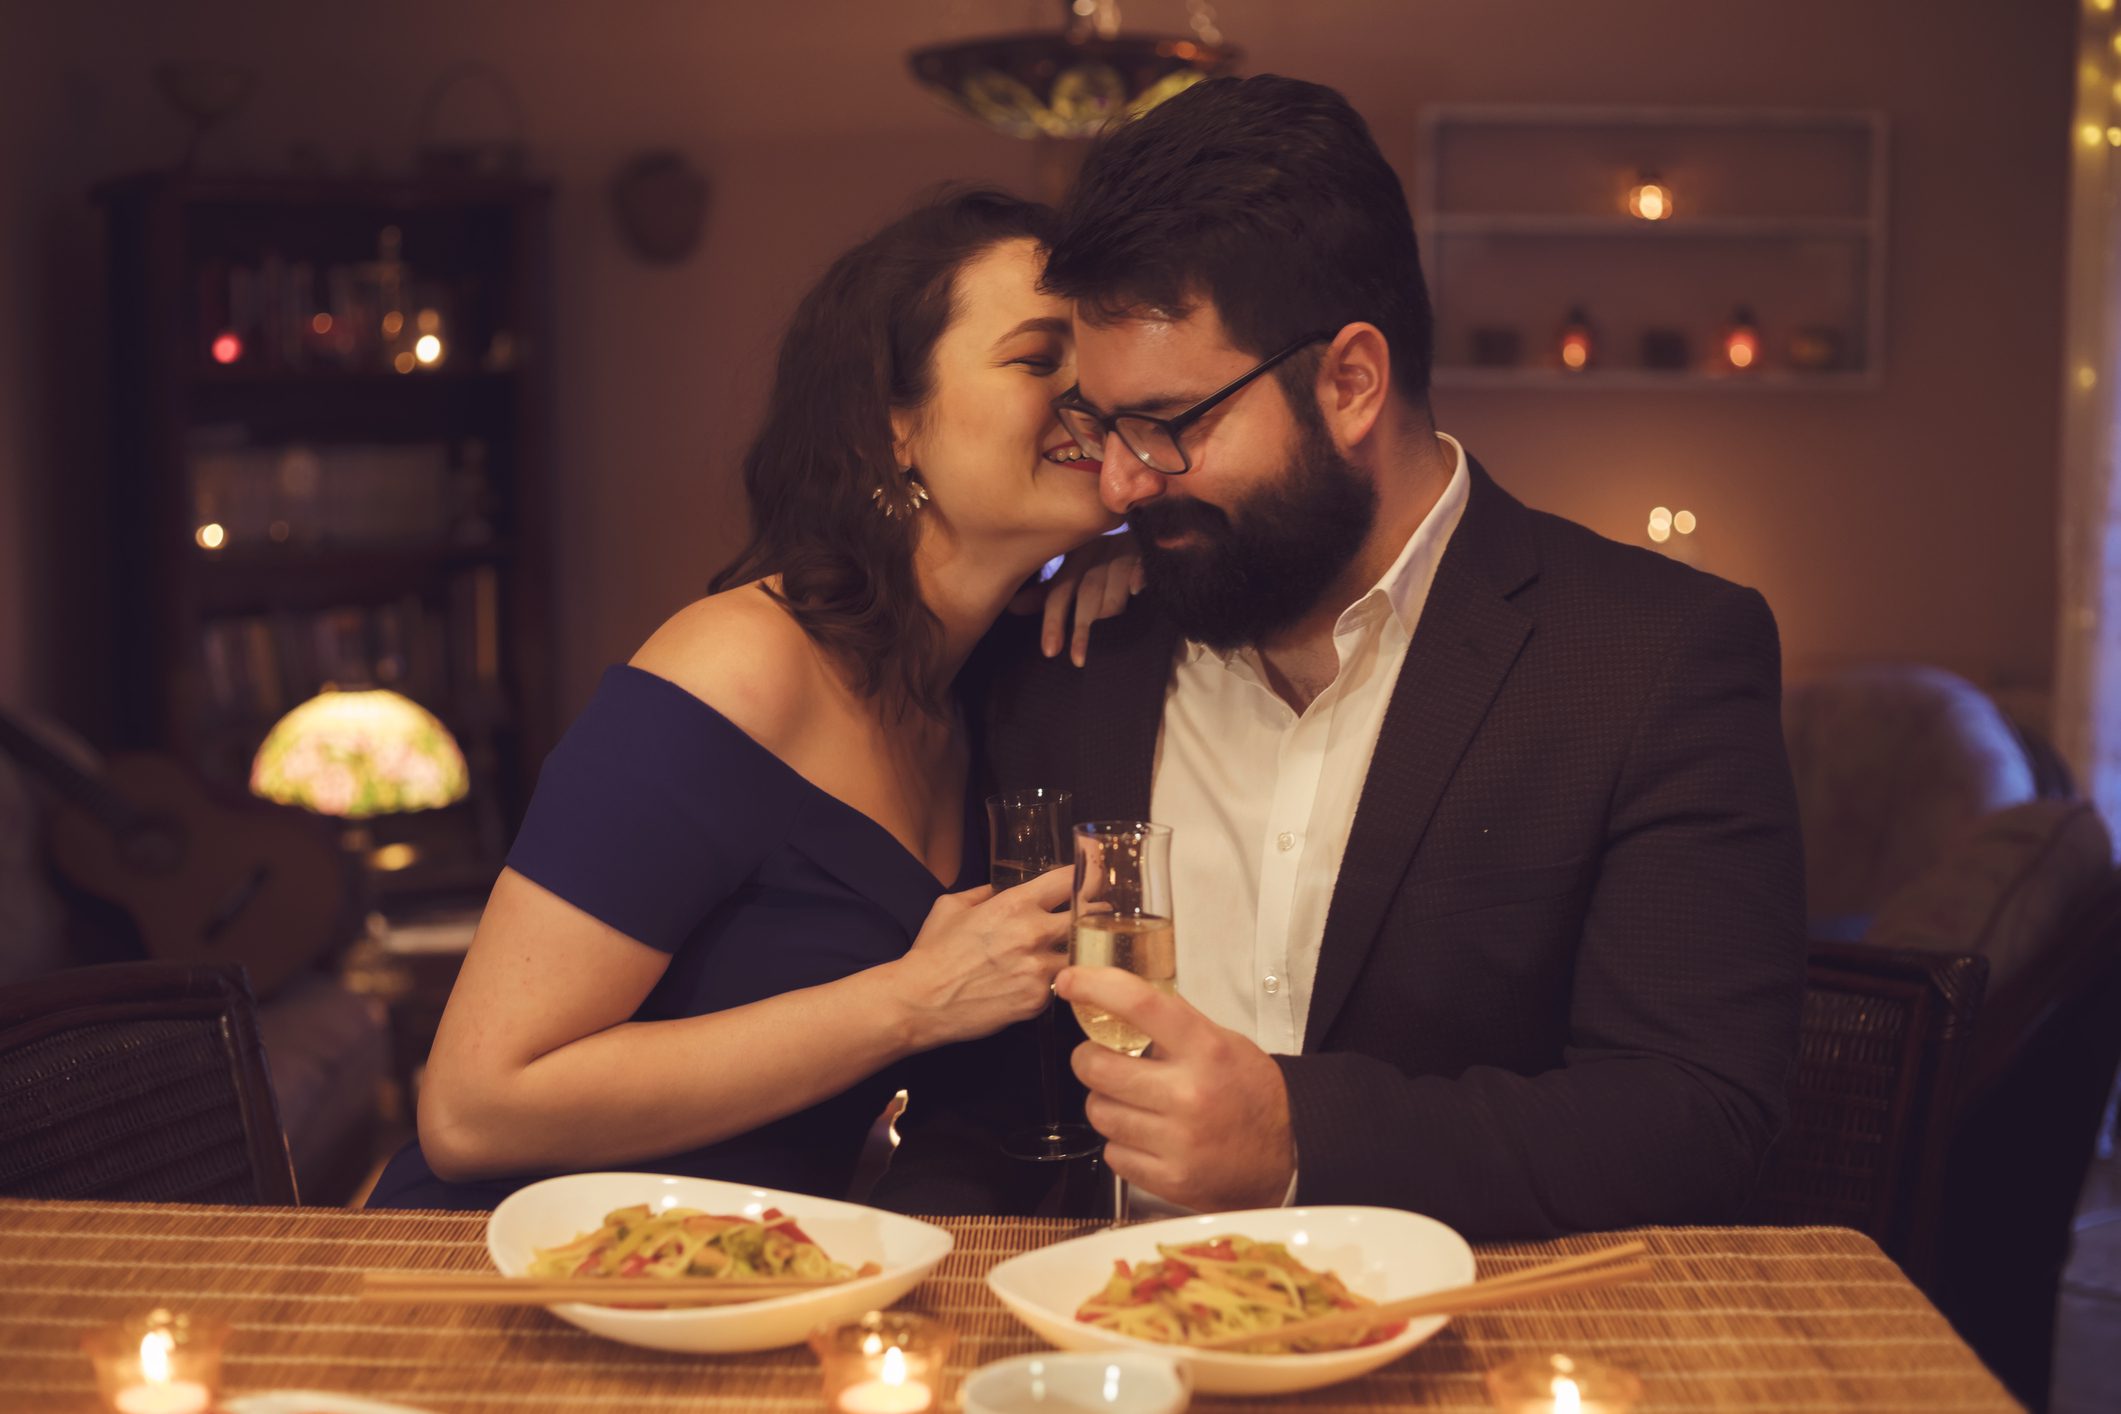 Two people on a romantic date with pasta in front of them.